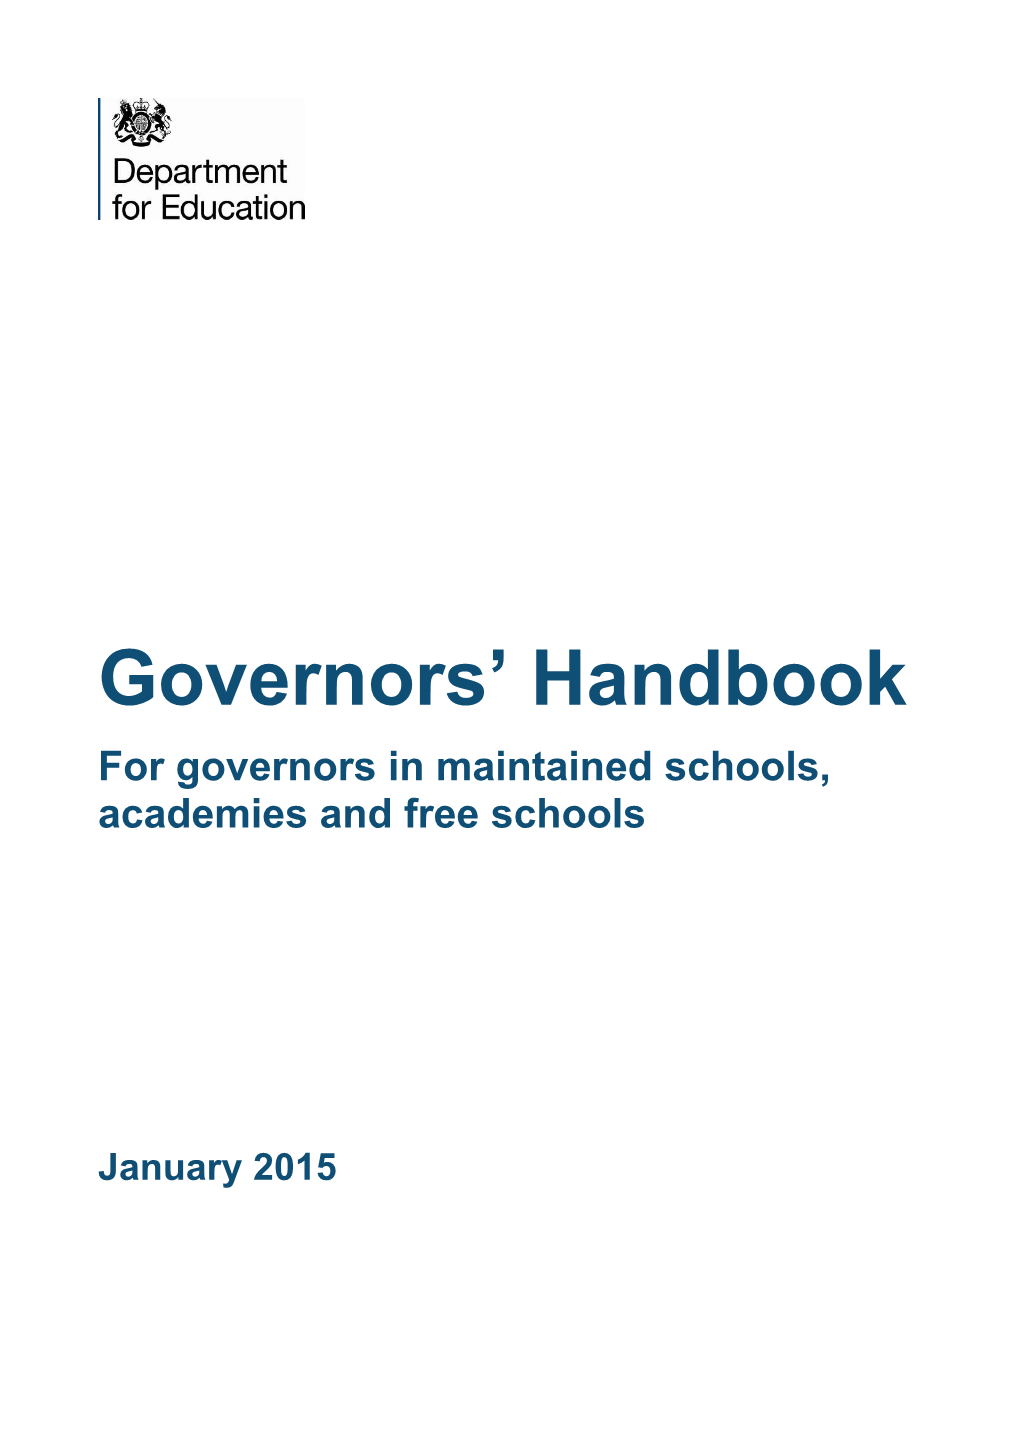 For Governors in Maintained Schools, Academies and Free Schools